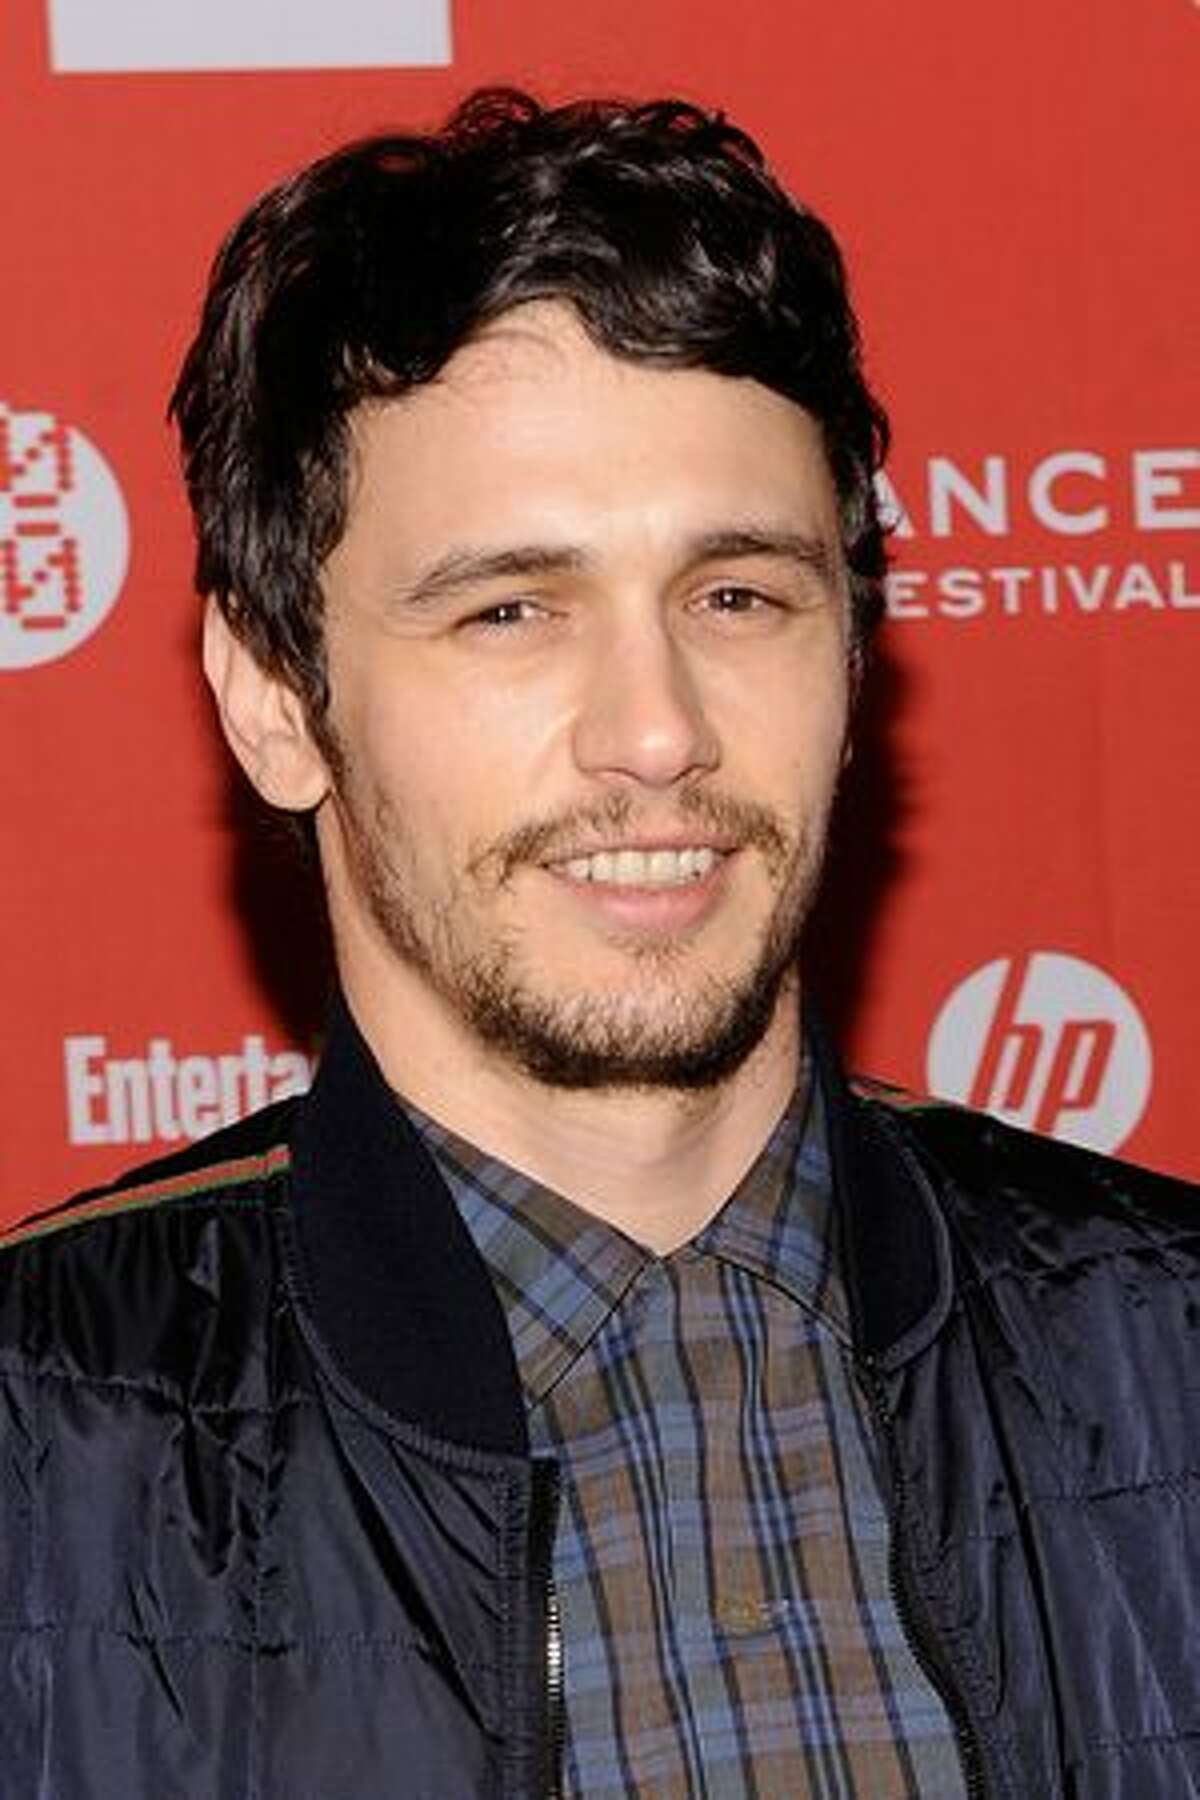 Actor James Franco attends "Howl" Premiere during the 2010 Sundance Film Festival at Eccles Theatre in Park City, Utah.